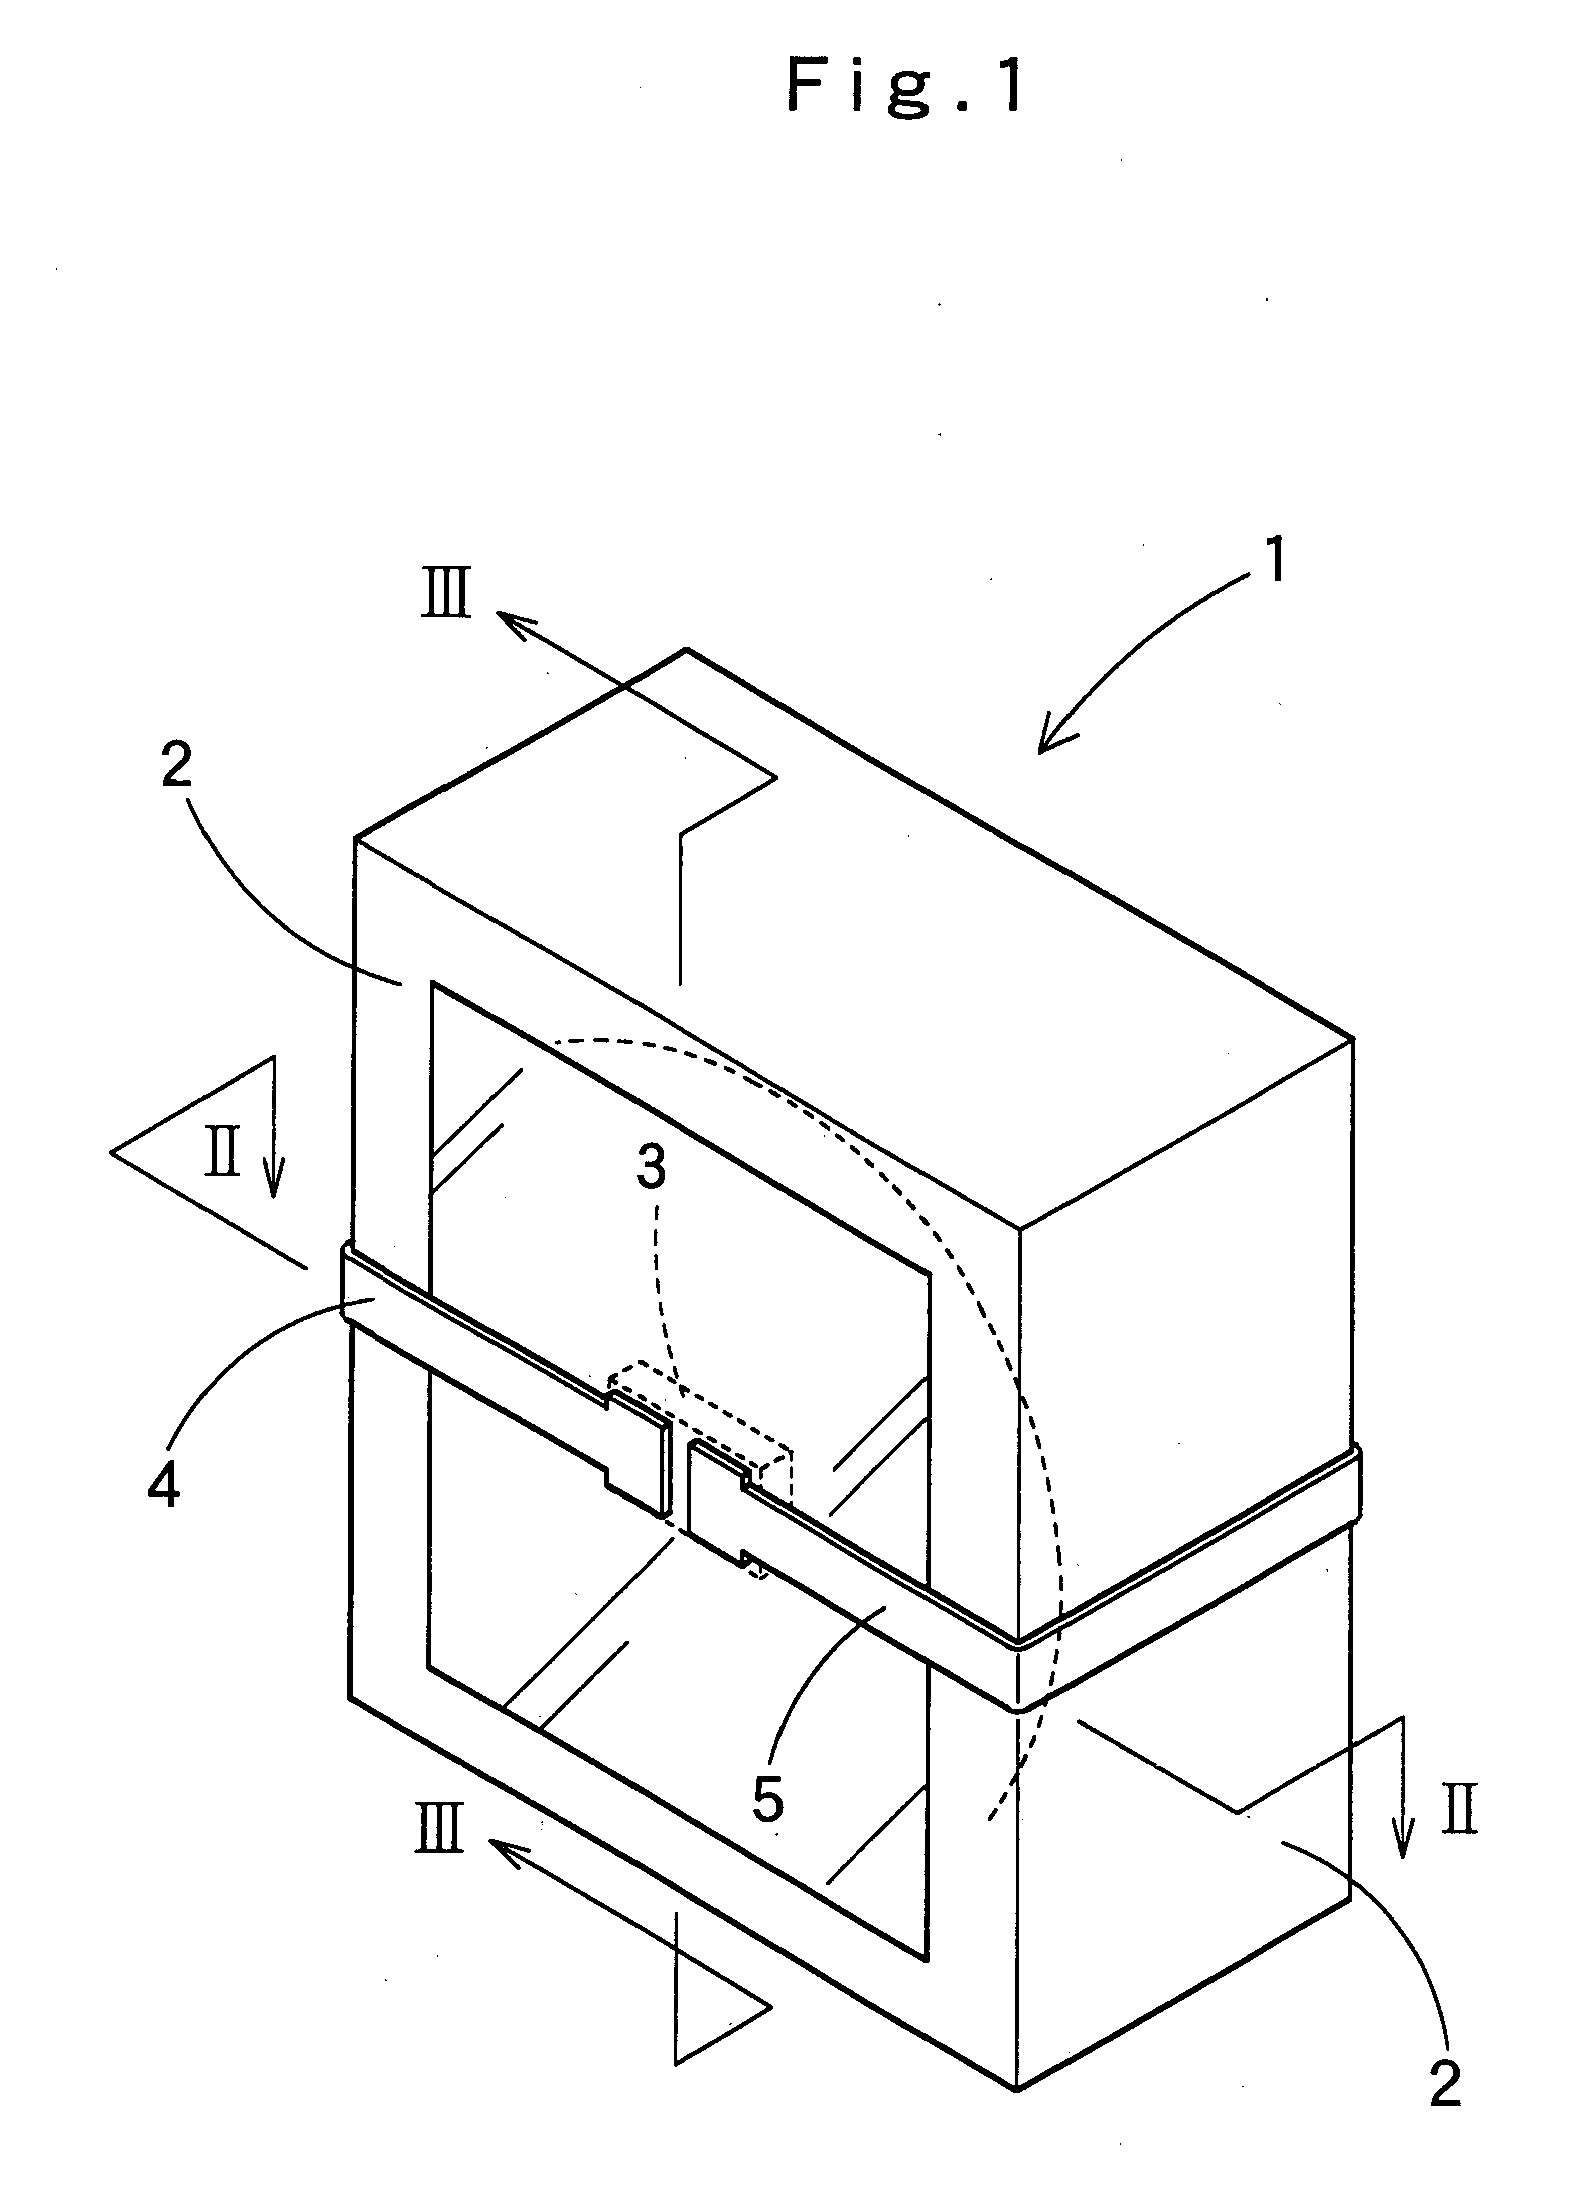 Reflective collection-type light receiving unit and light receiving apparatus for spatial light communications